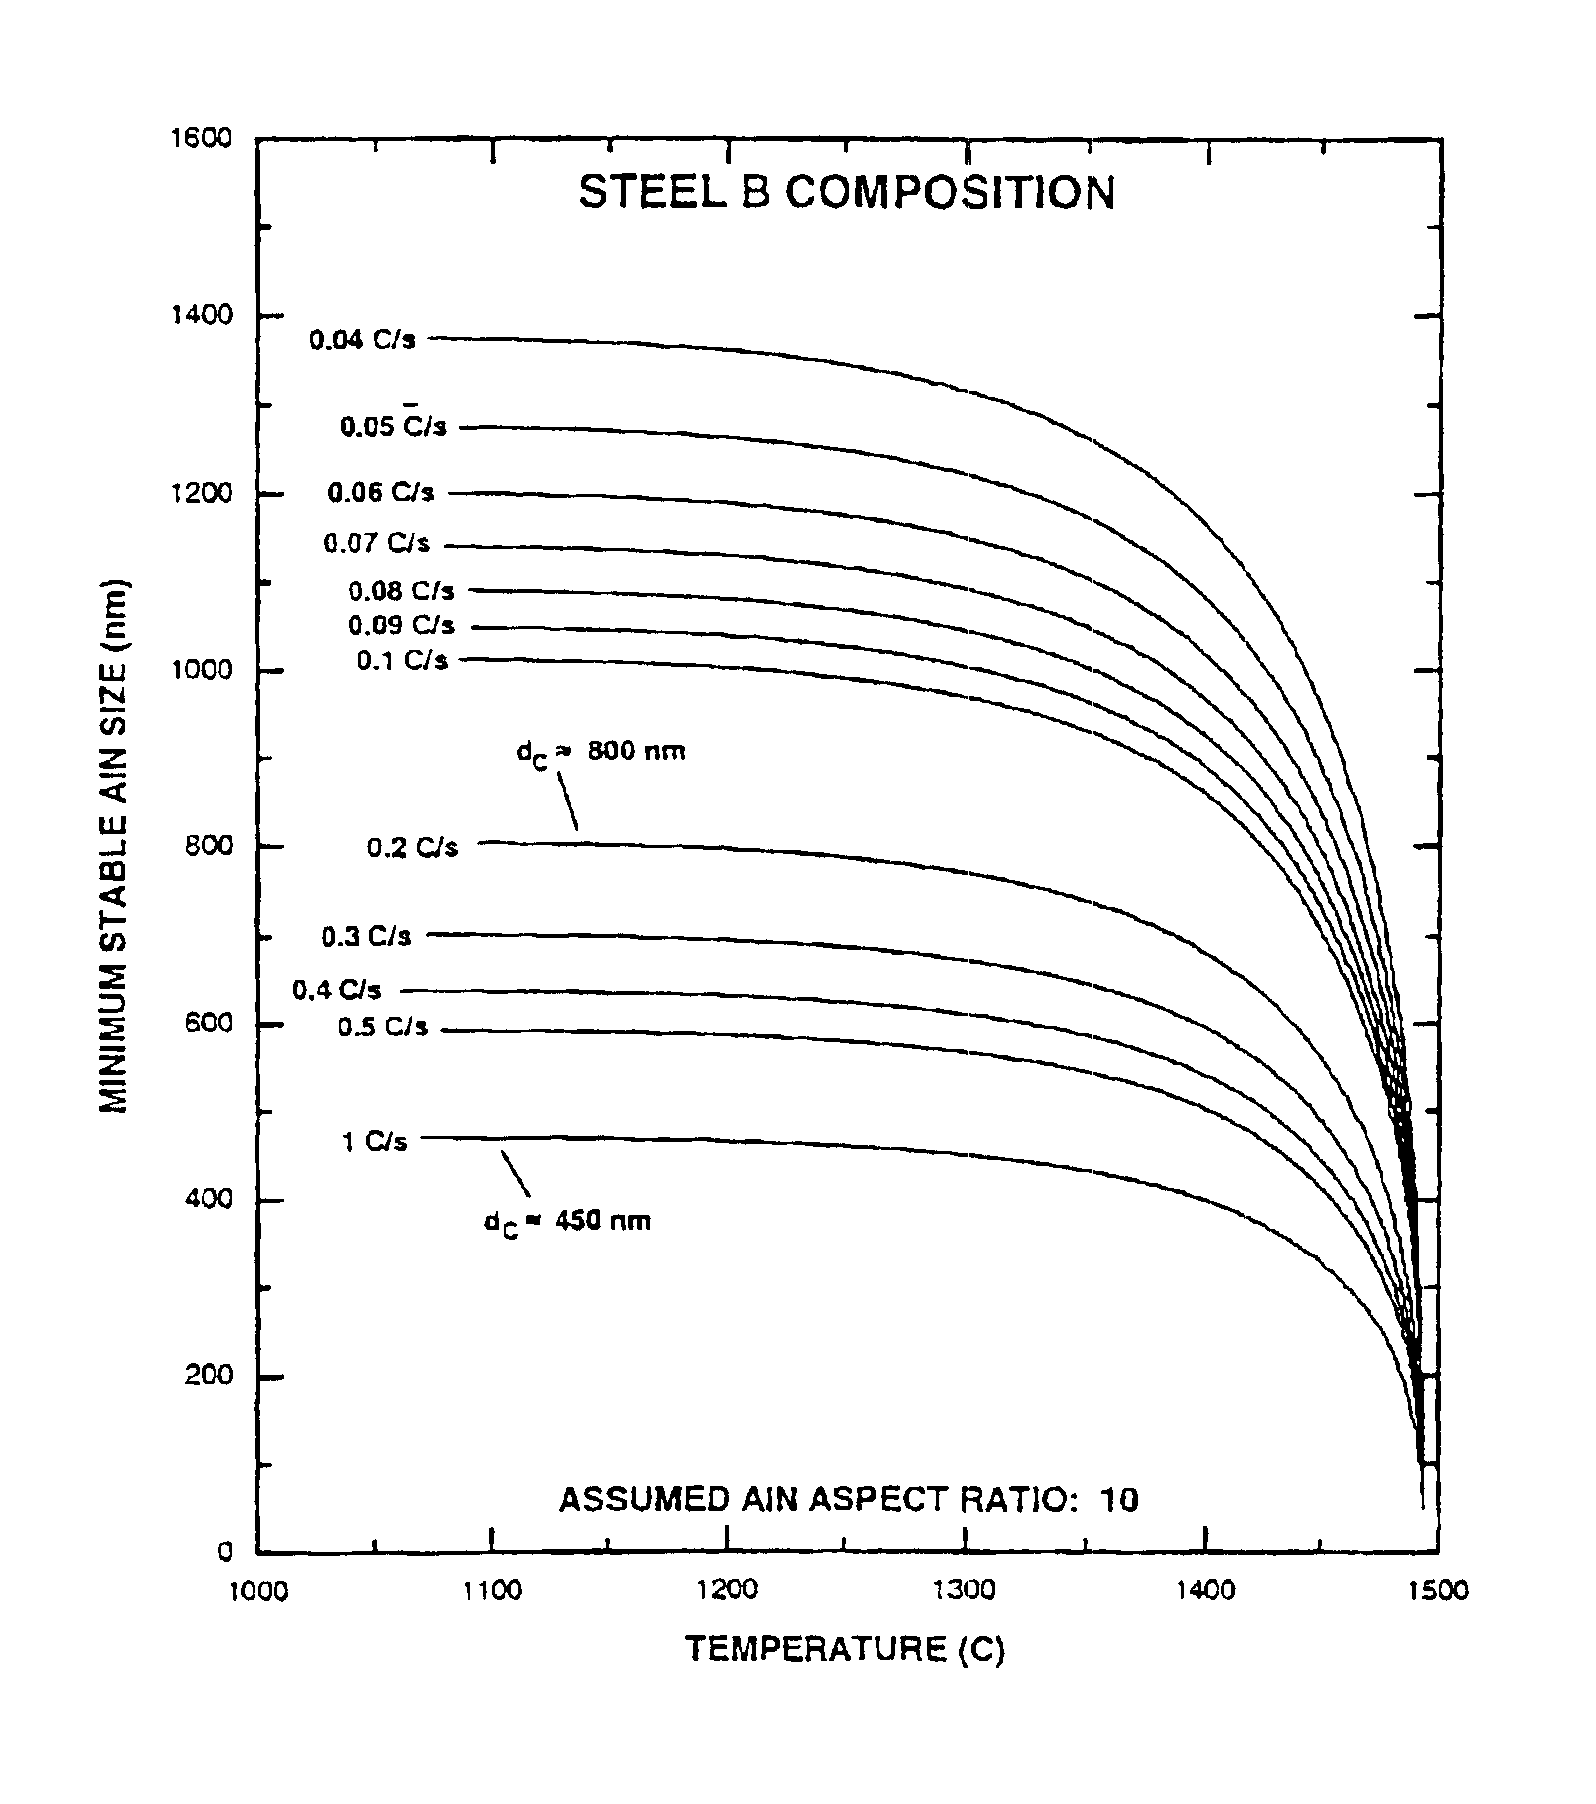 Method of improving the toughness of low-carbon, high-strength steels